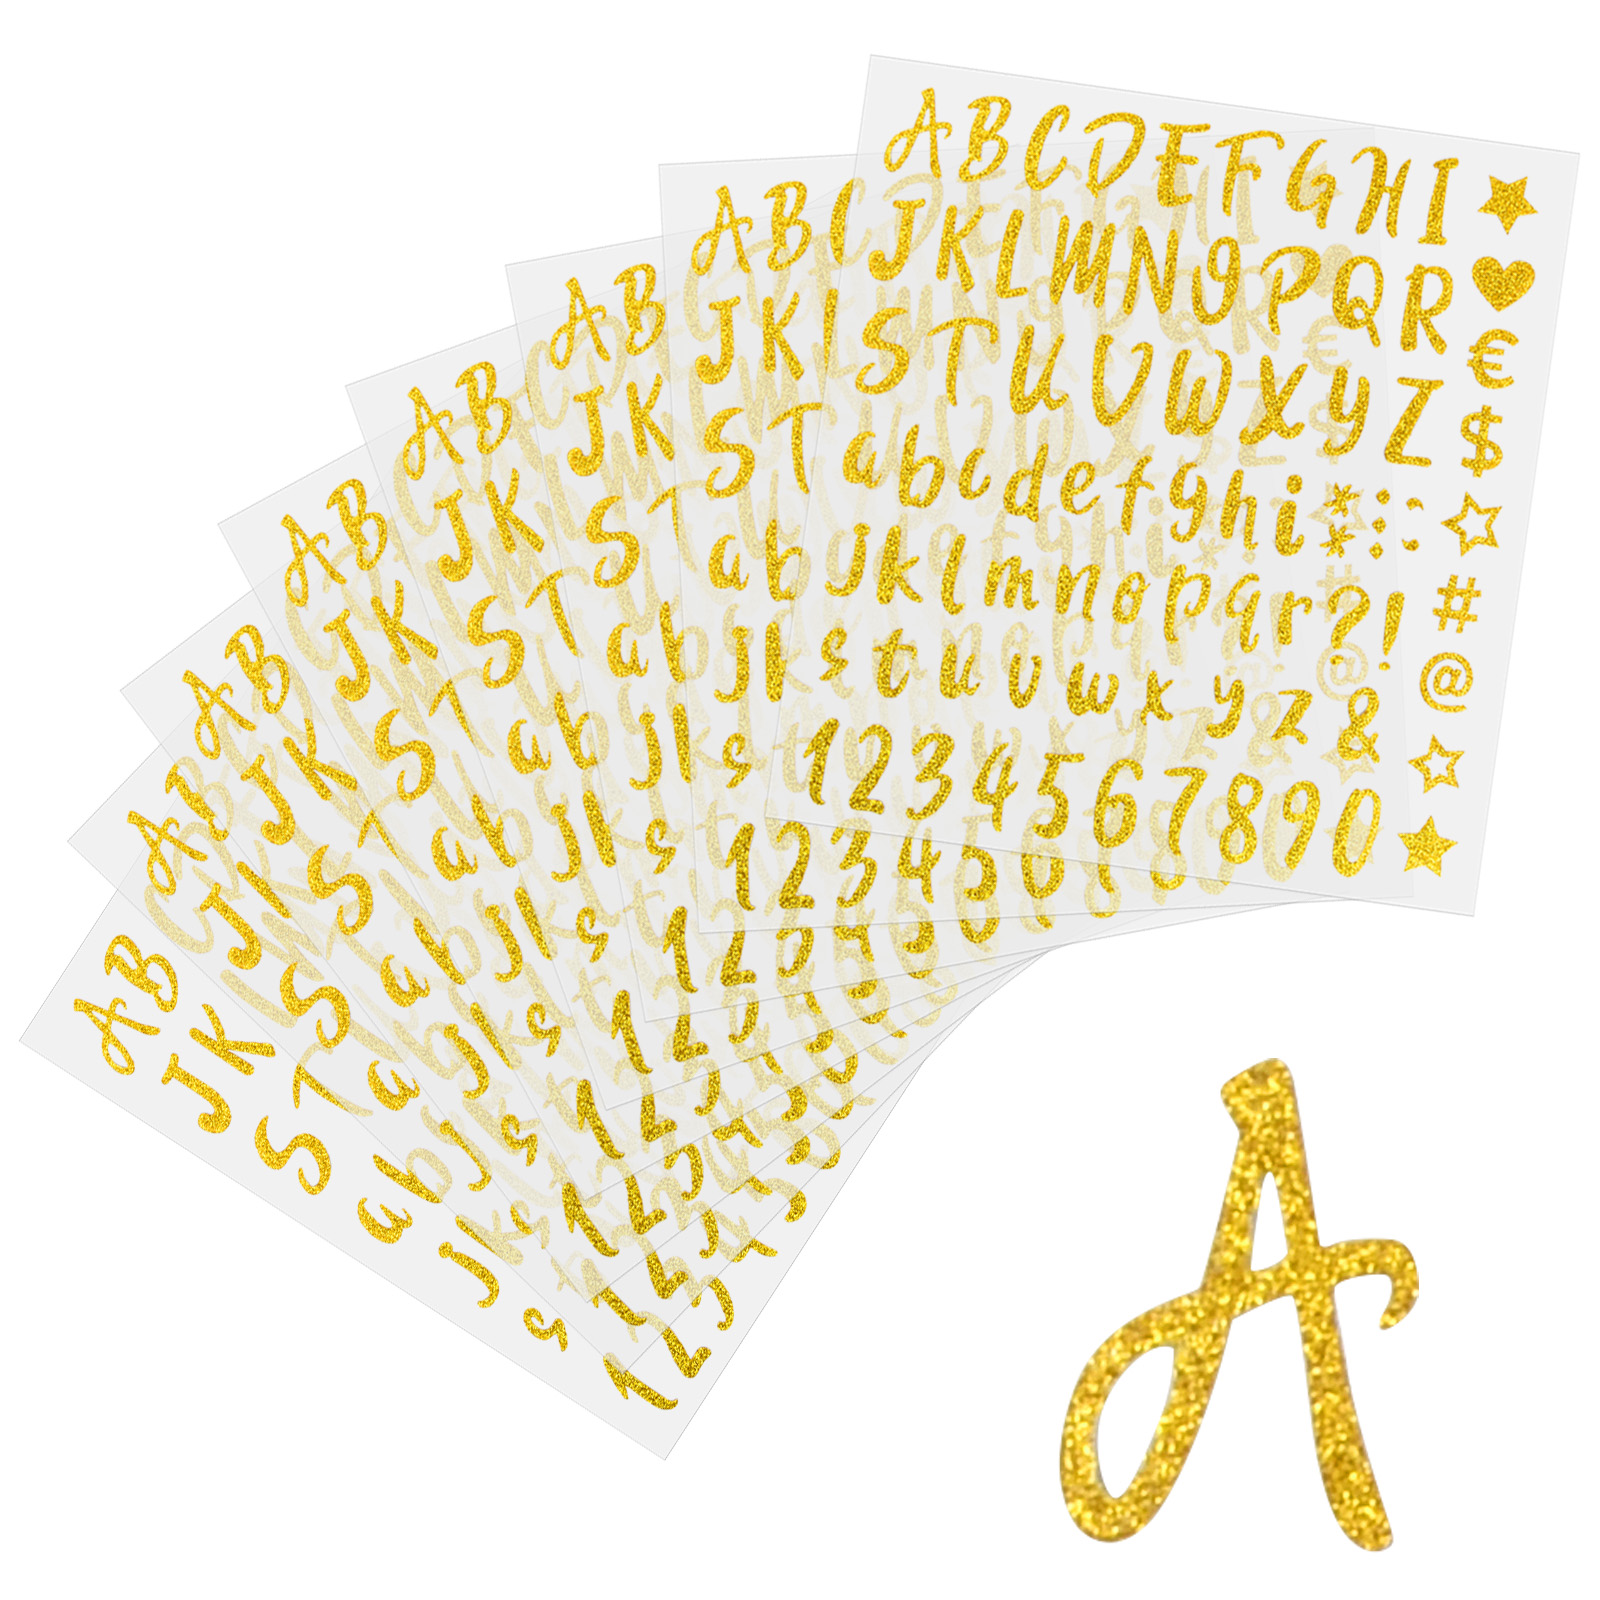 Alphabet Stickers and Rhinestone Stickers for Decoration and DIY Crafts, Glitter Alphabet Stickers for Kids, Teachers, Students. (Gold)